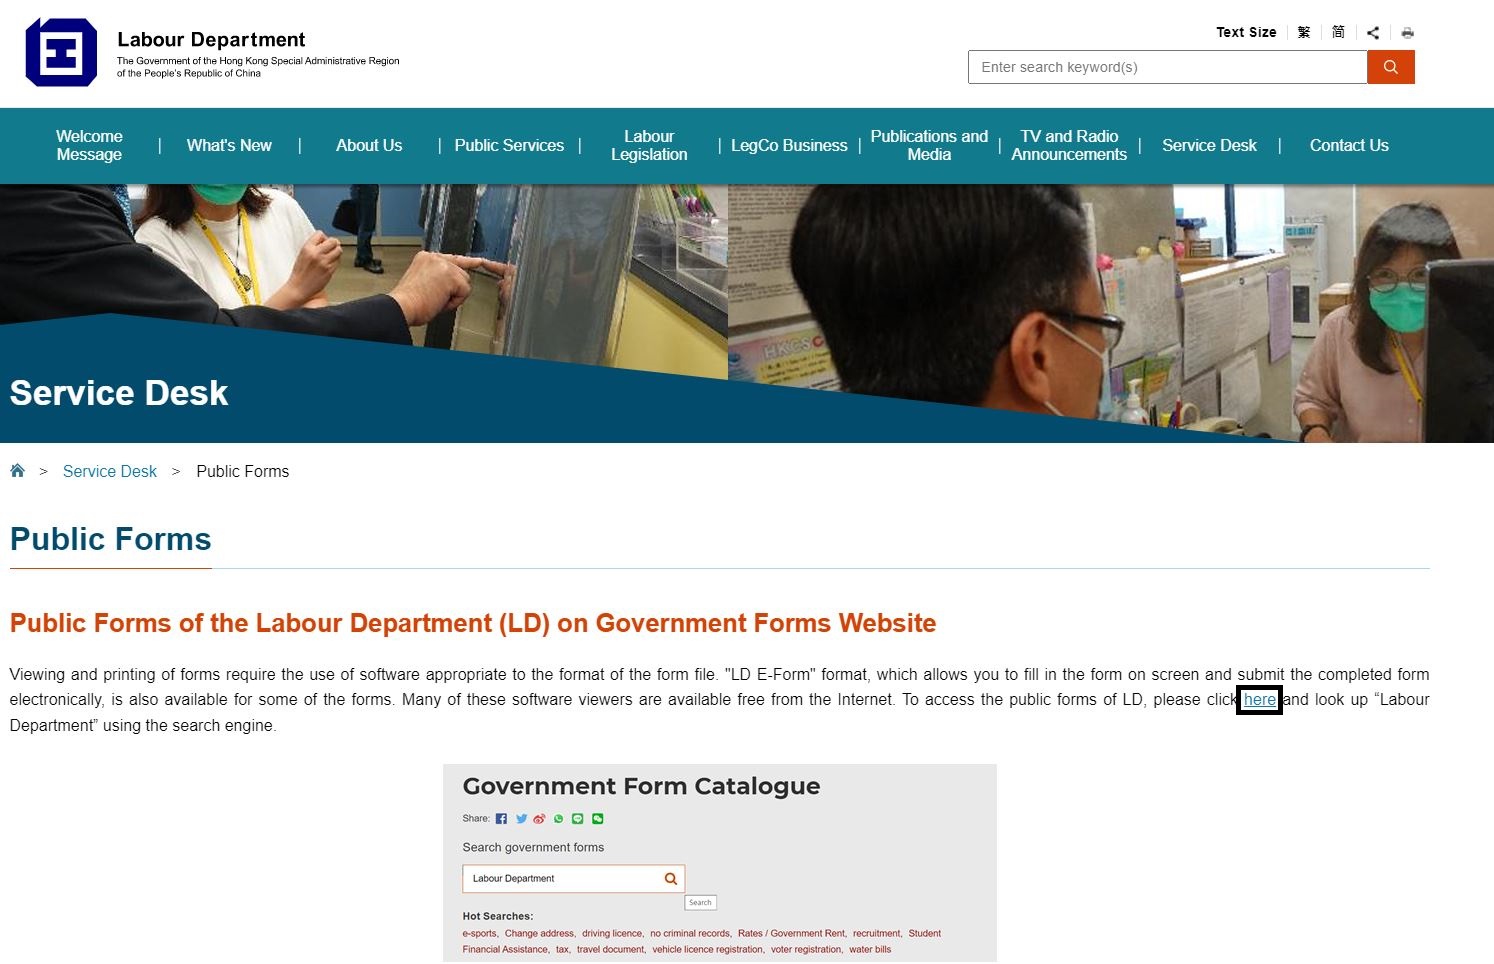 "Public Forms" - "Public Forms of the Labour Department (LD) on Government Forms Website"